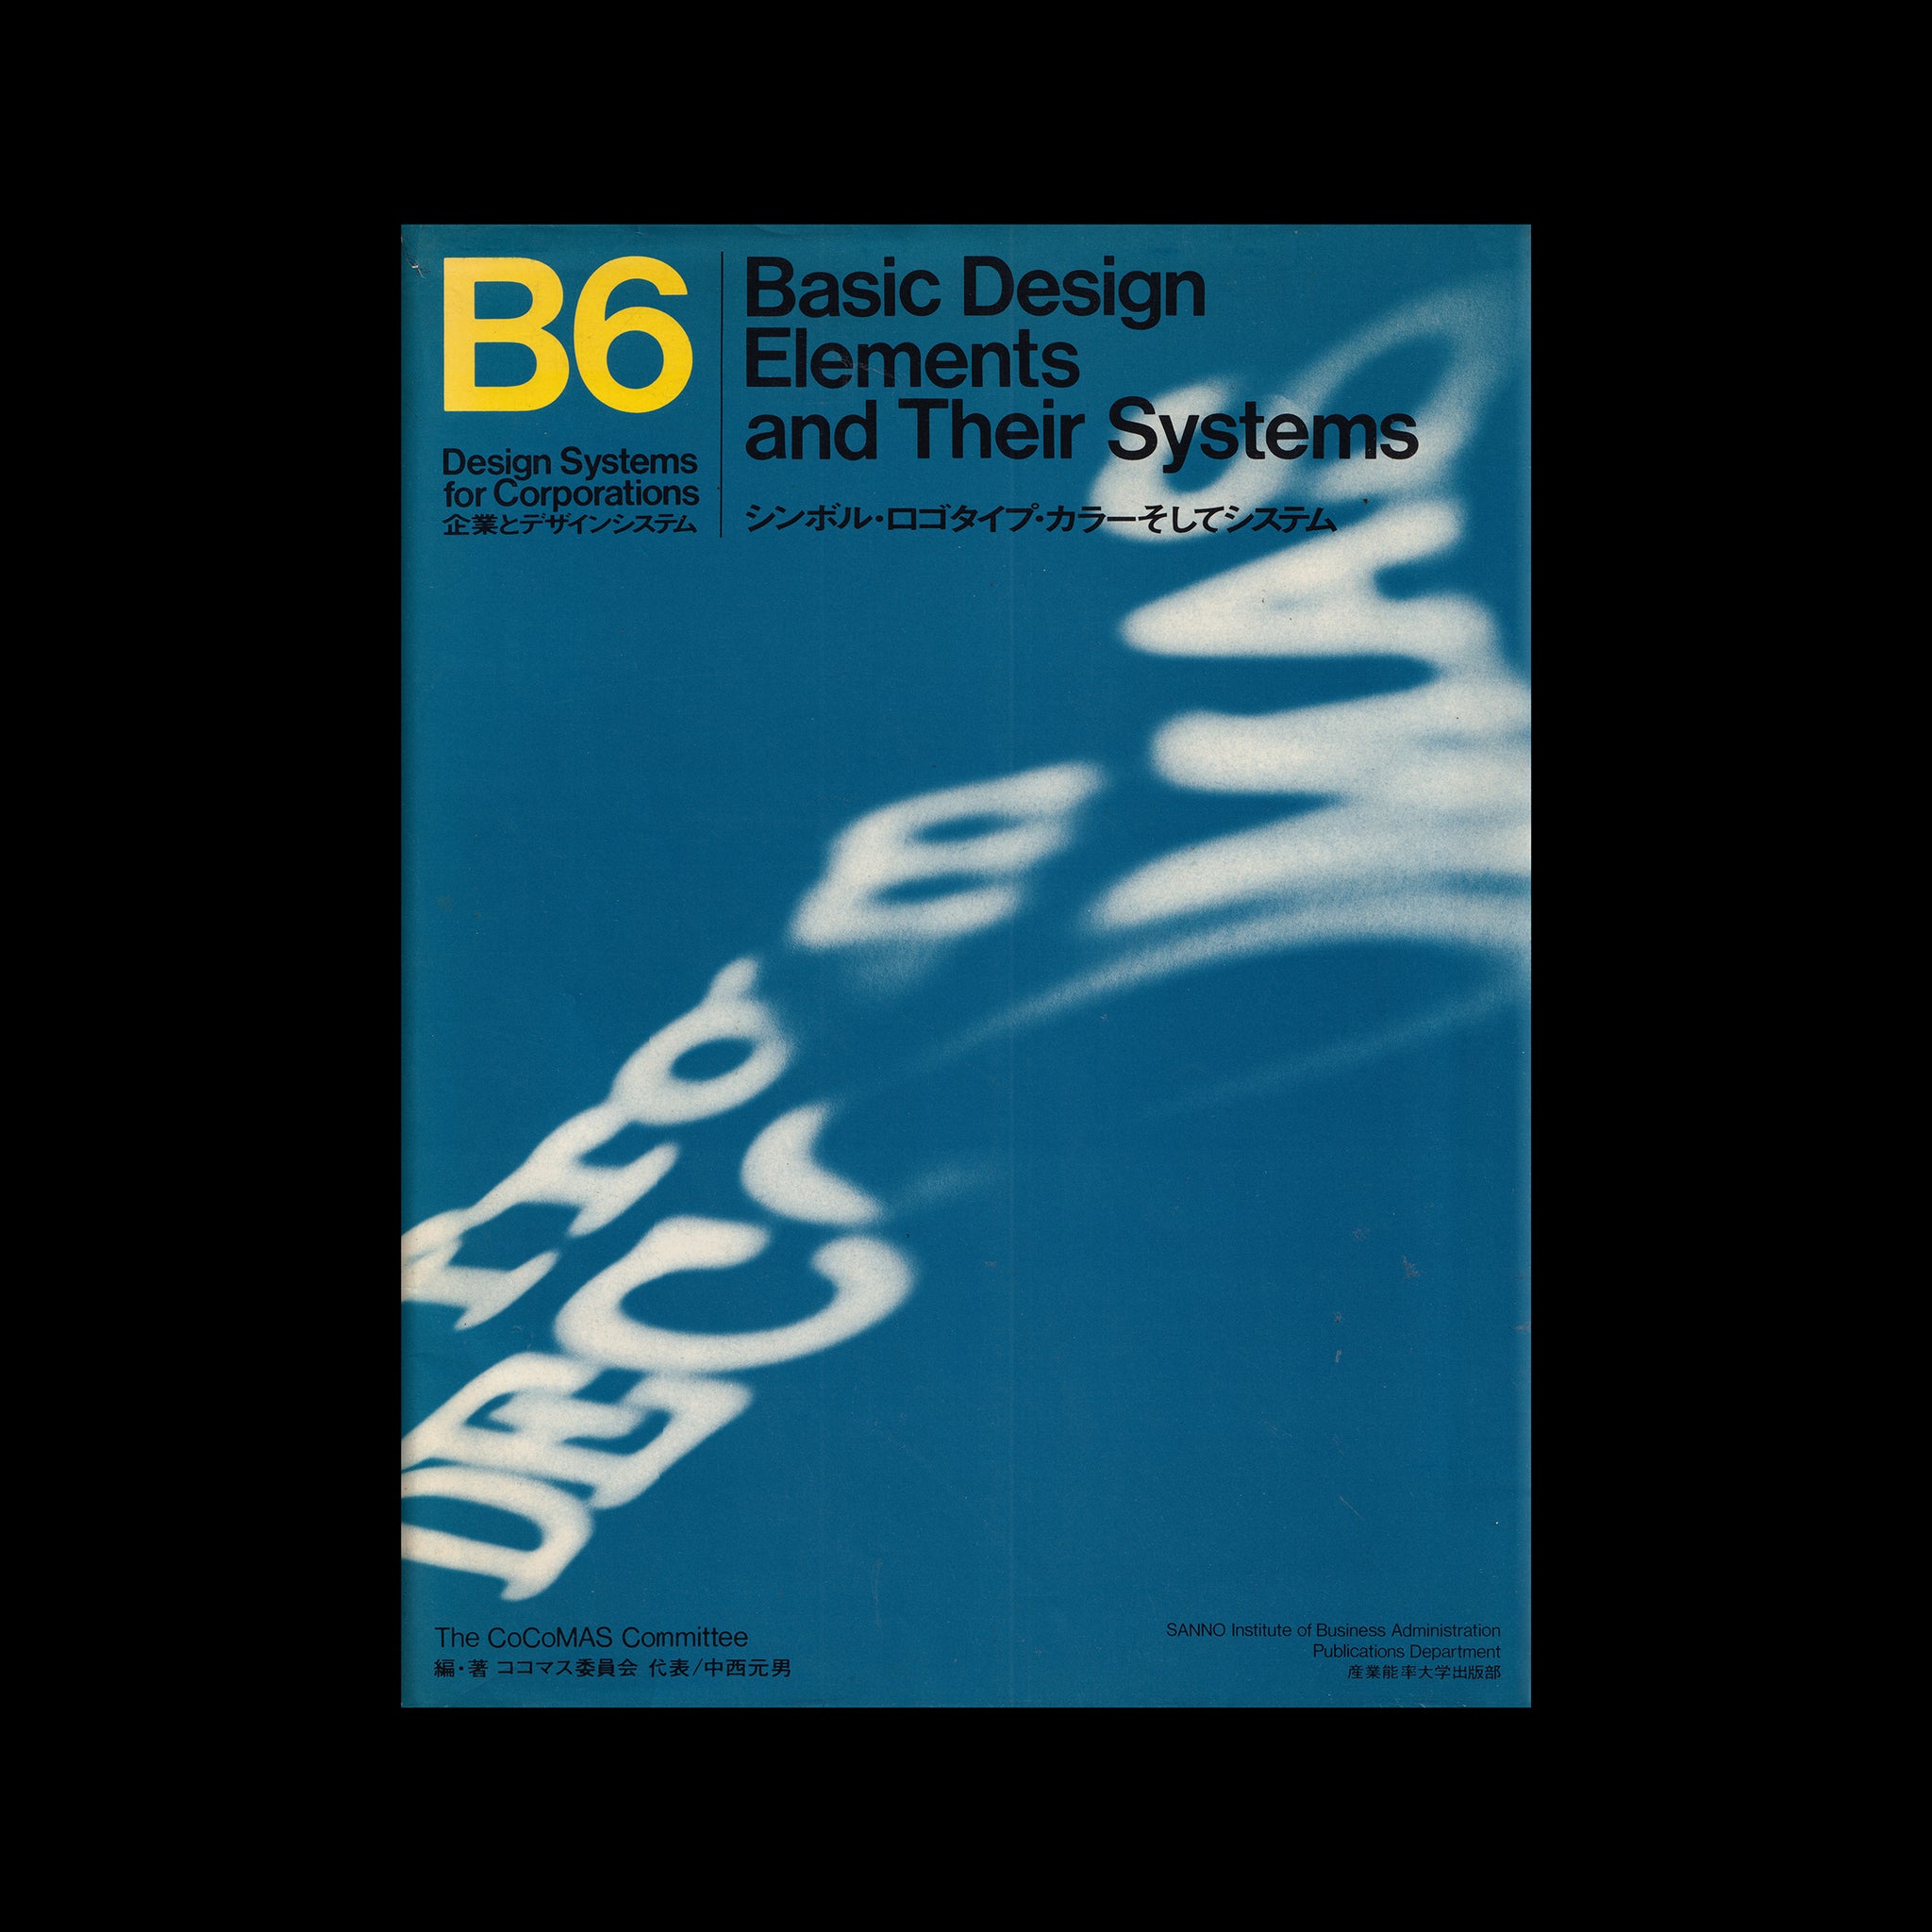 B6 Basic Design Elements and their Systems, 1983